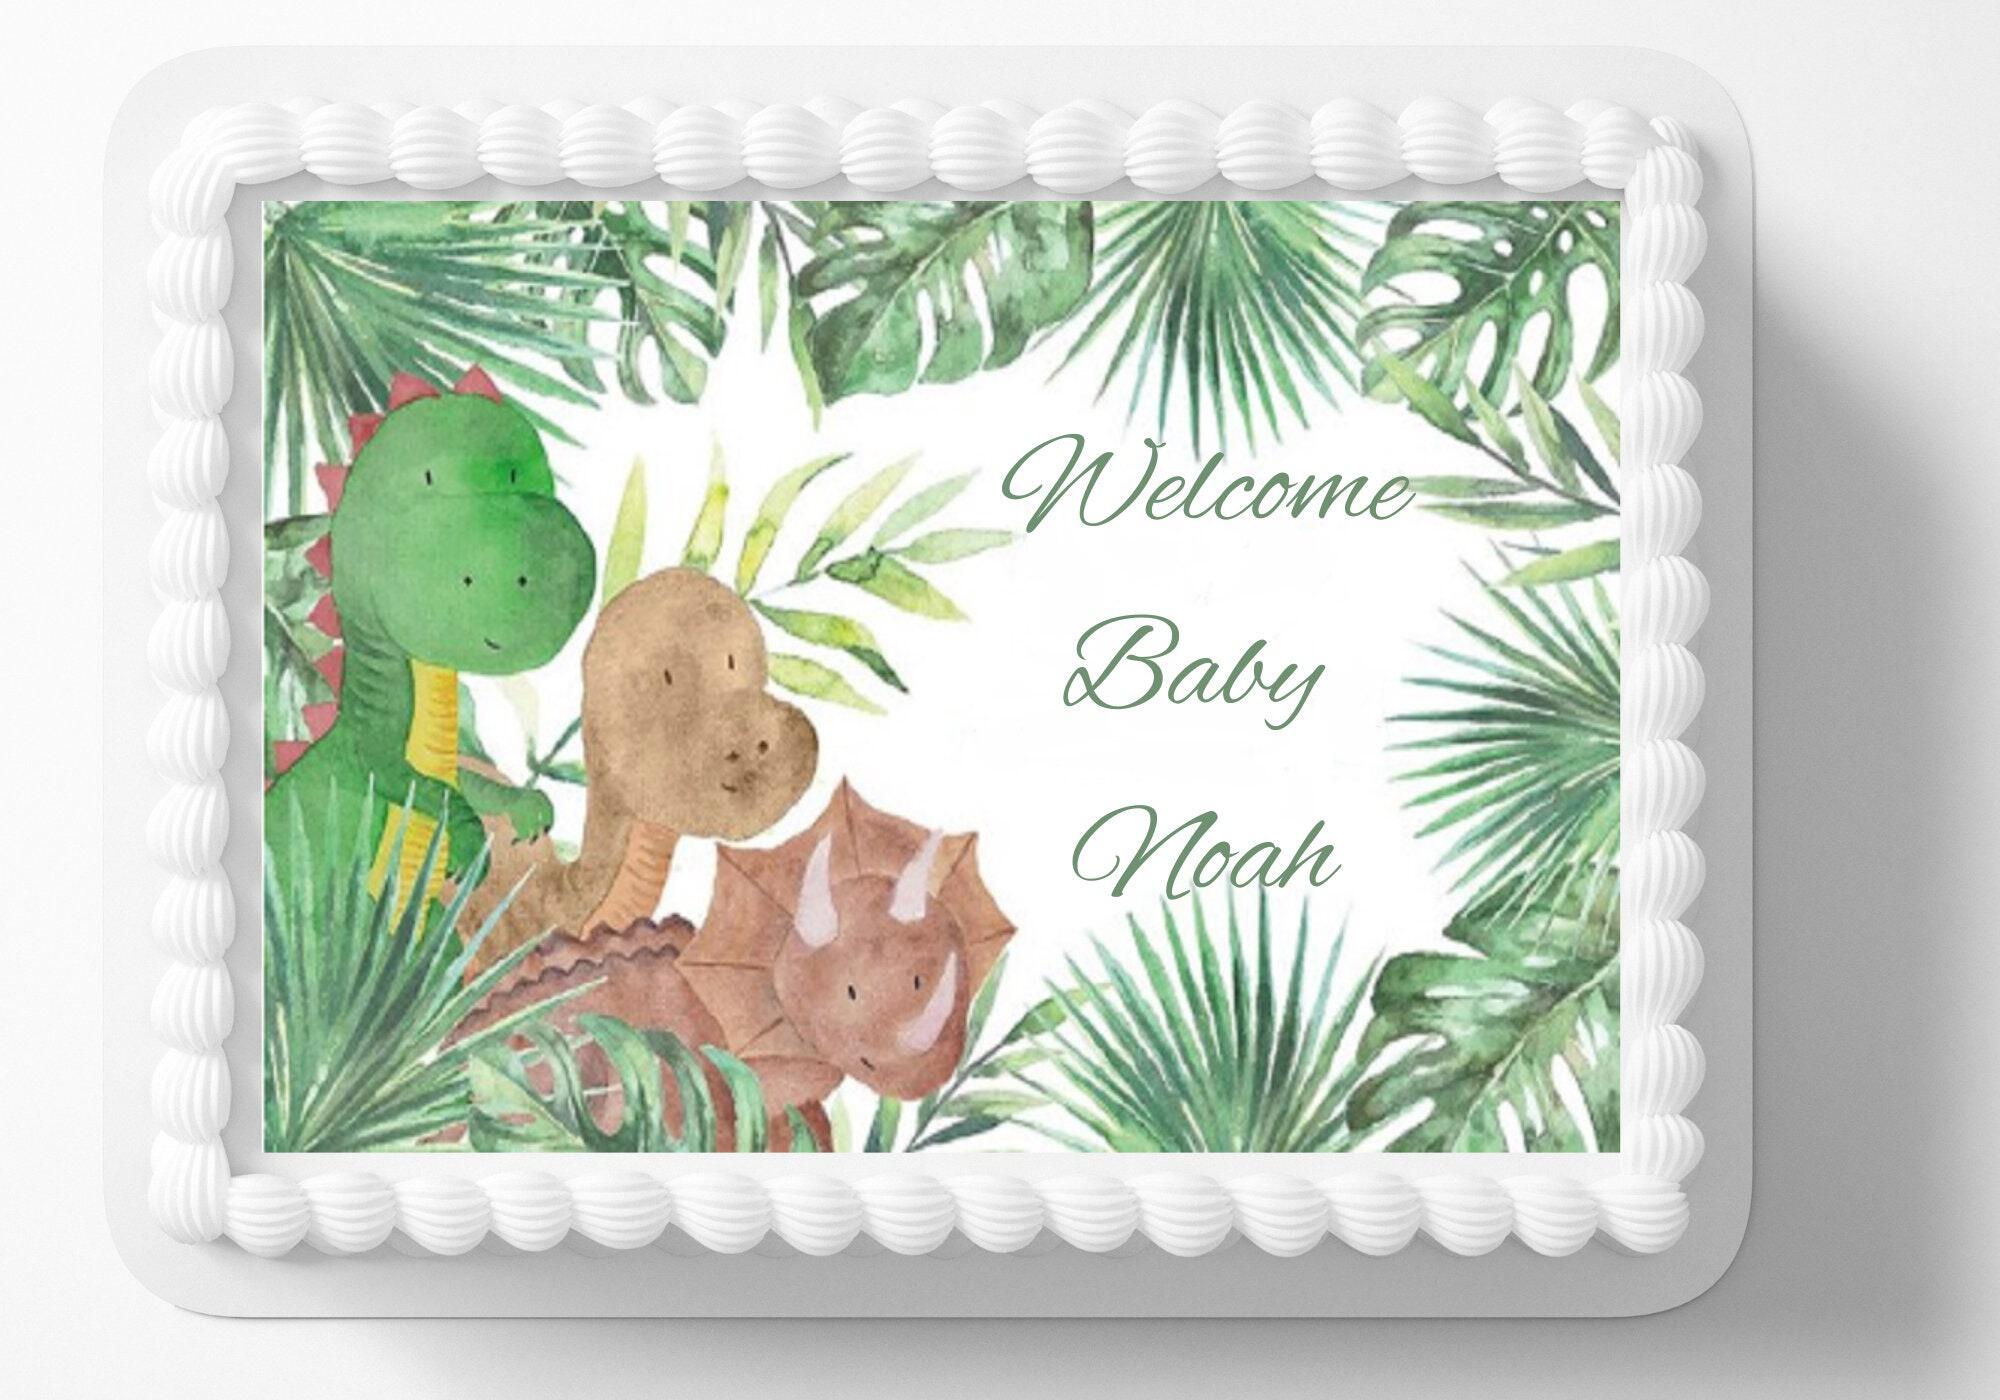 Wedding & Celebrations :: Party Supplies :: Cake Toppers :: Dinosaur Dino  Edible Image Baby Shower Themed Birthday Party Cake Topper Frosting Sheet  Icing Frosting Edible Sticker Decal